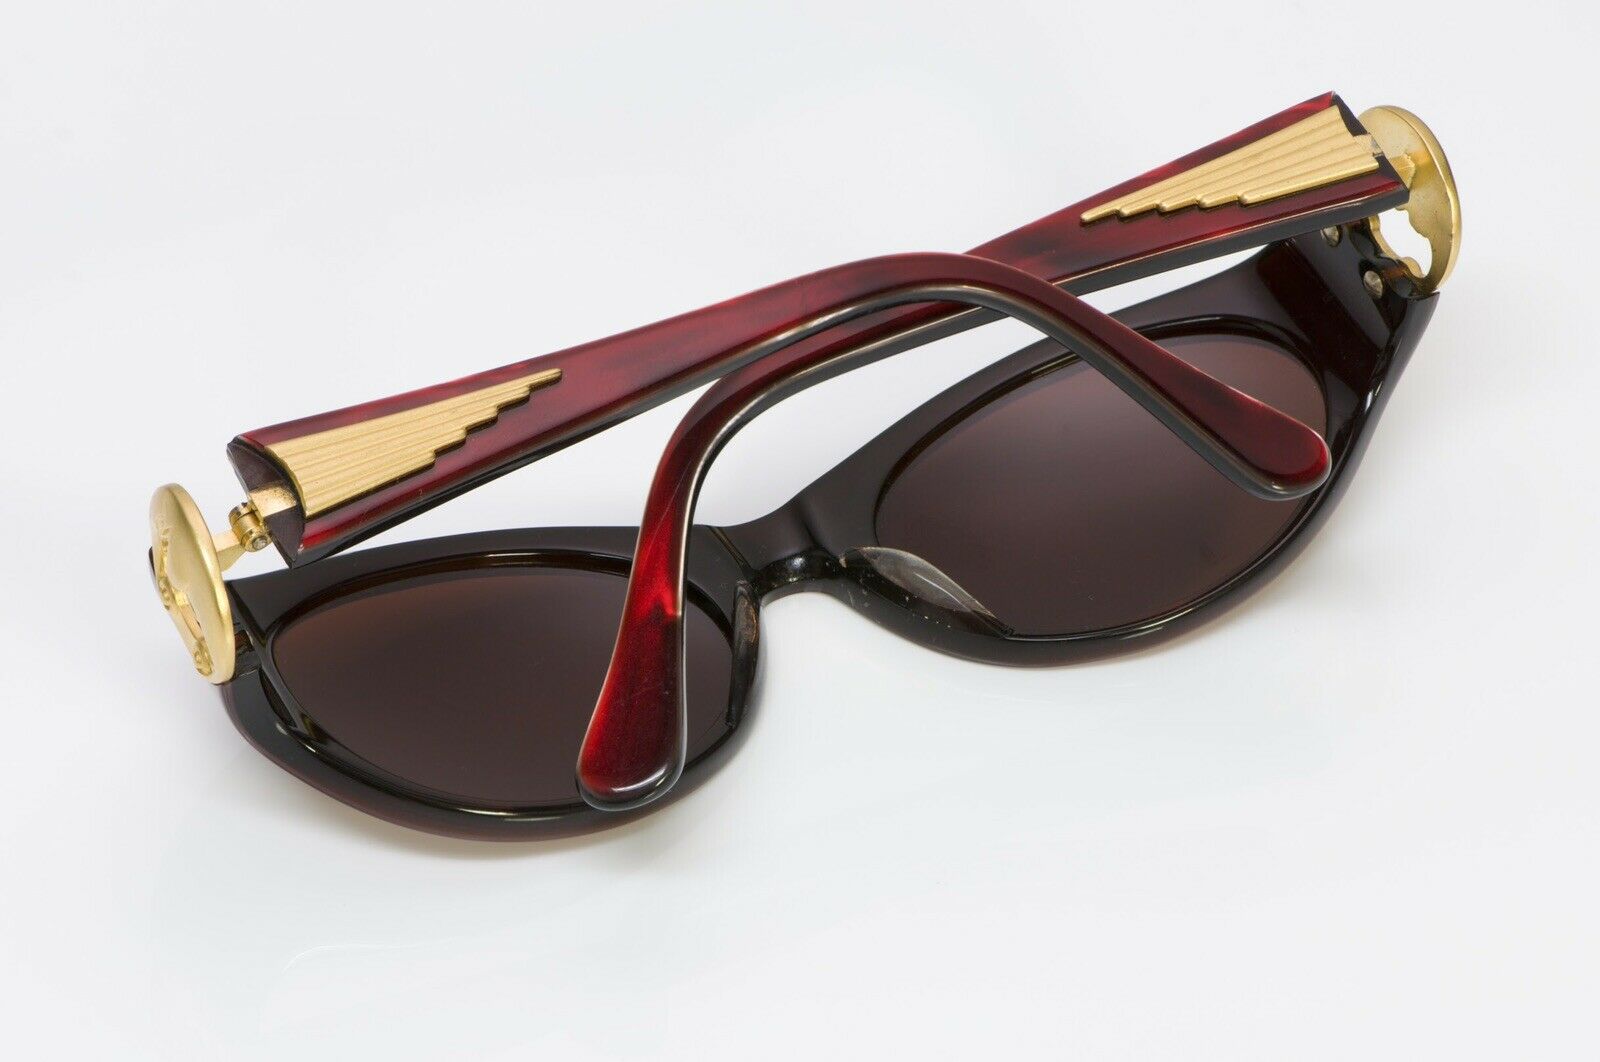 Barry Kieselstein Cord Burgundy Red Moon Crescent Women’s Sunglasses - DSF Antique Jewelry